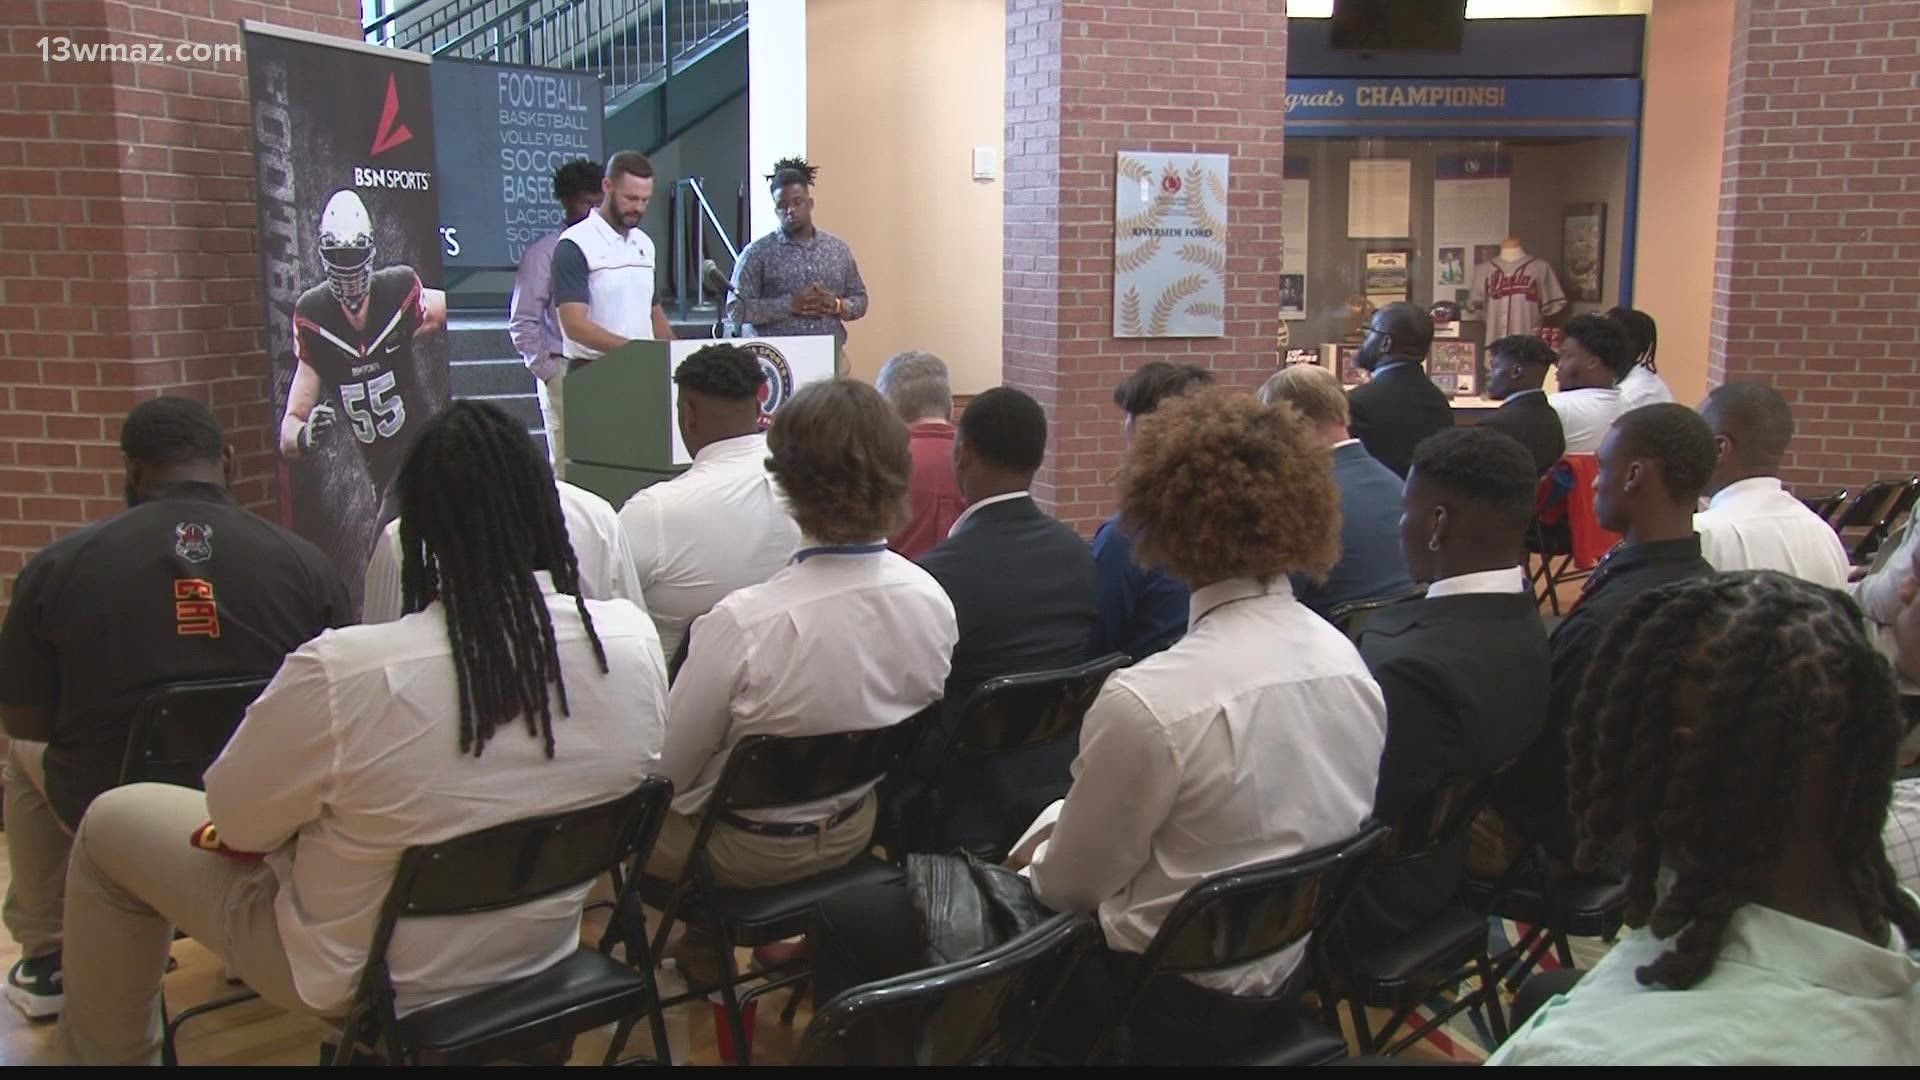 Several schools in Bibb county showed up, and several student athletes were recognized.